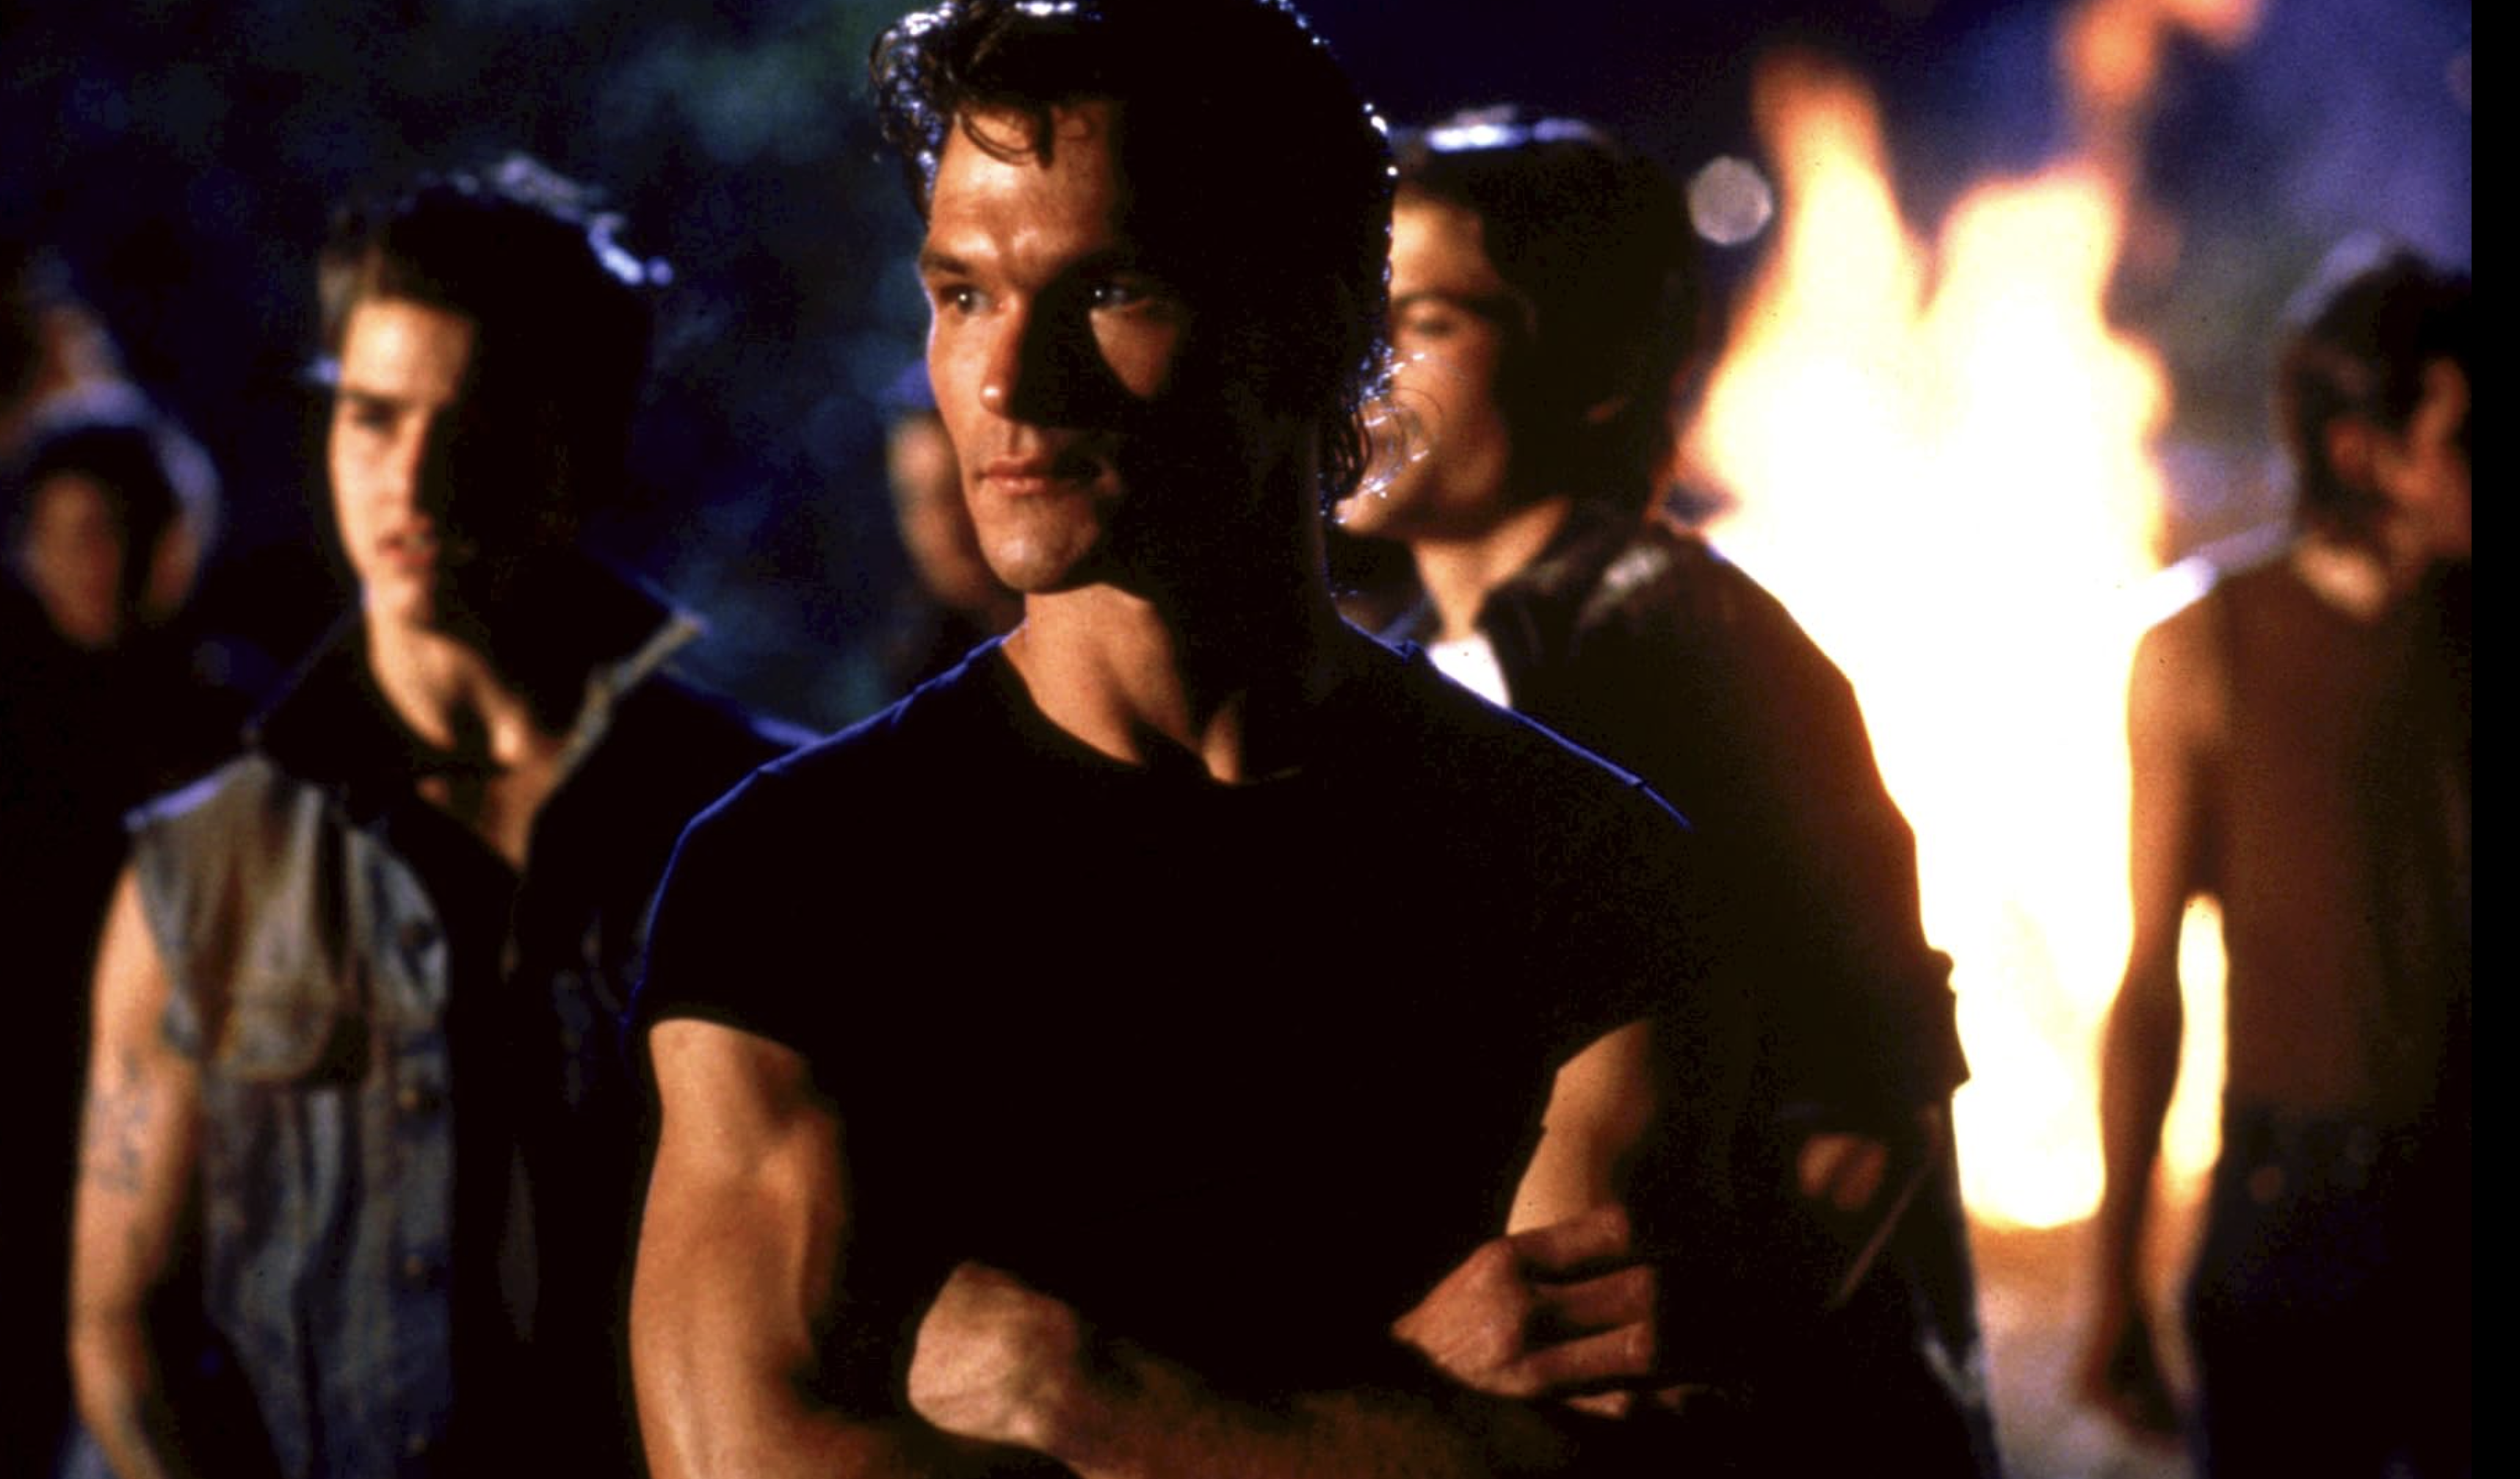 Patrick Swayze in "The Outsiders" from IMDB